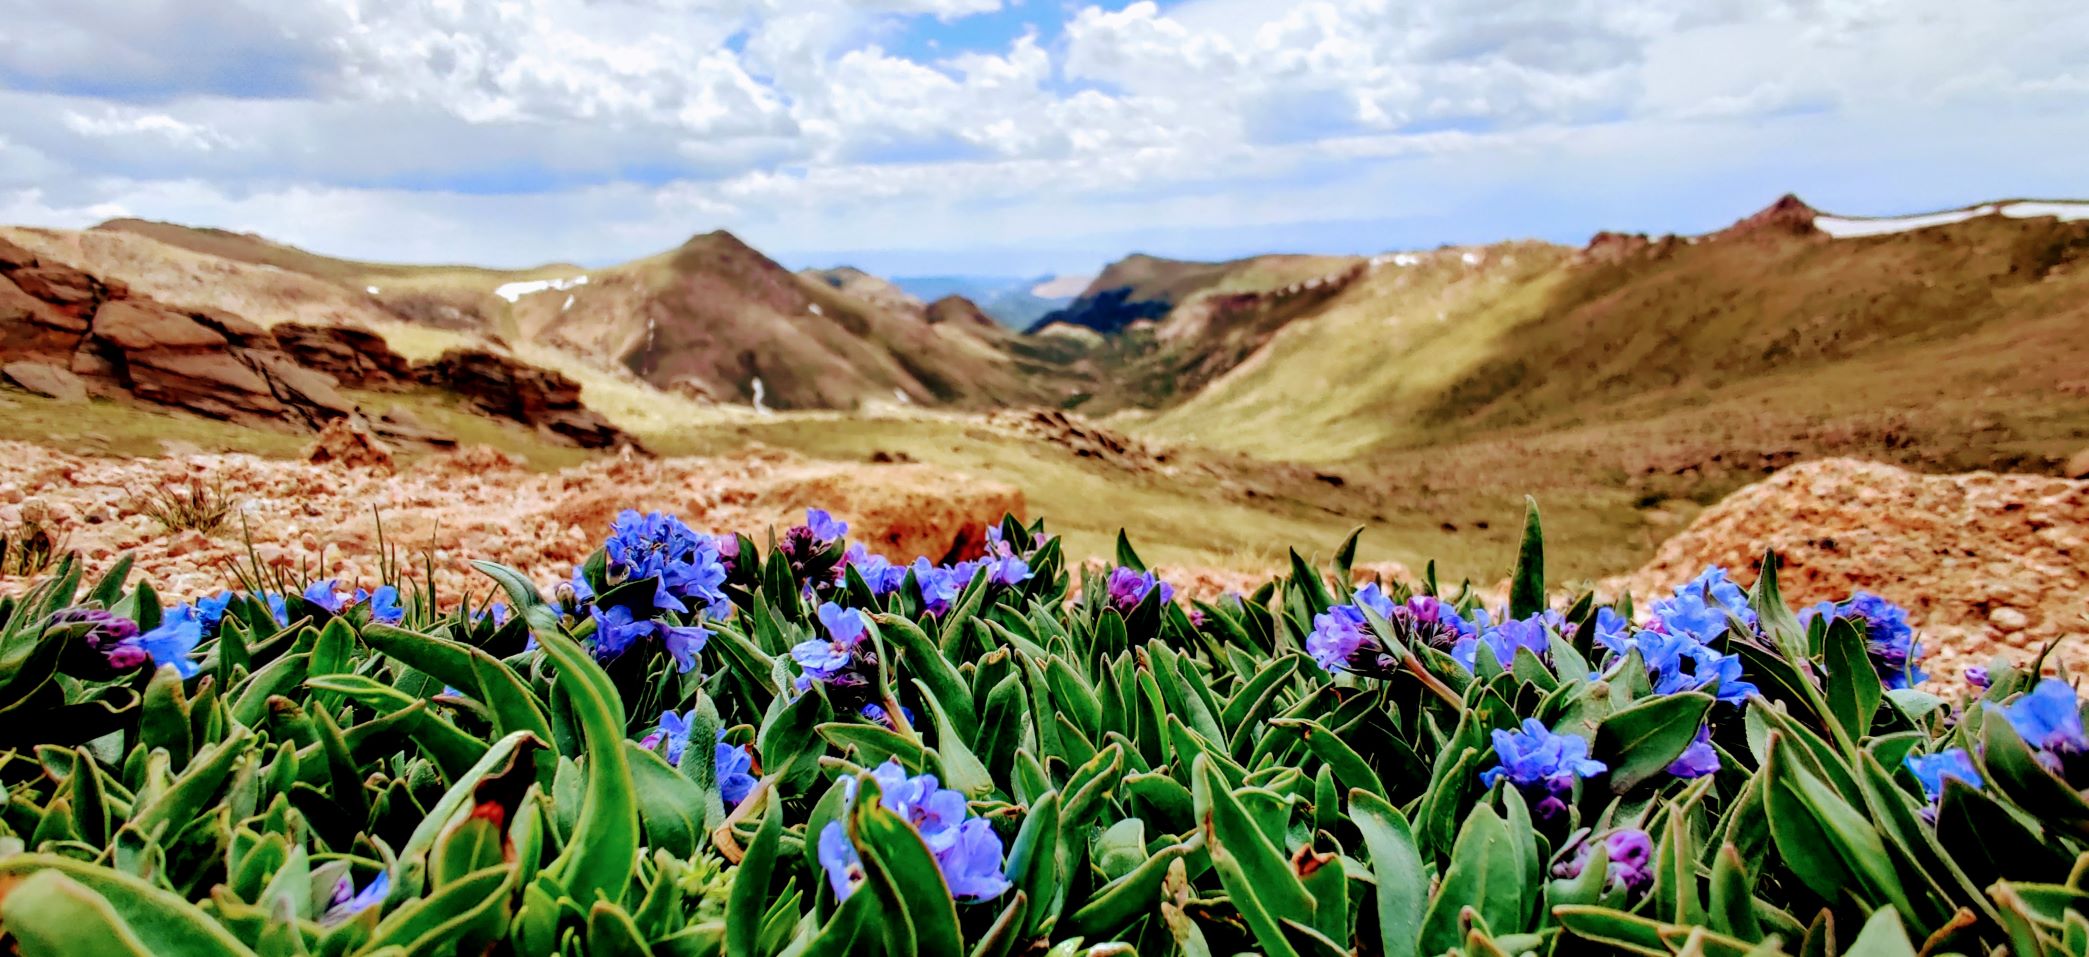 small, blue wildflowers bloom high above a mountain valley in the distance